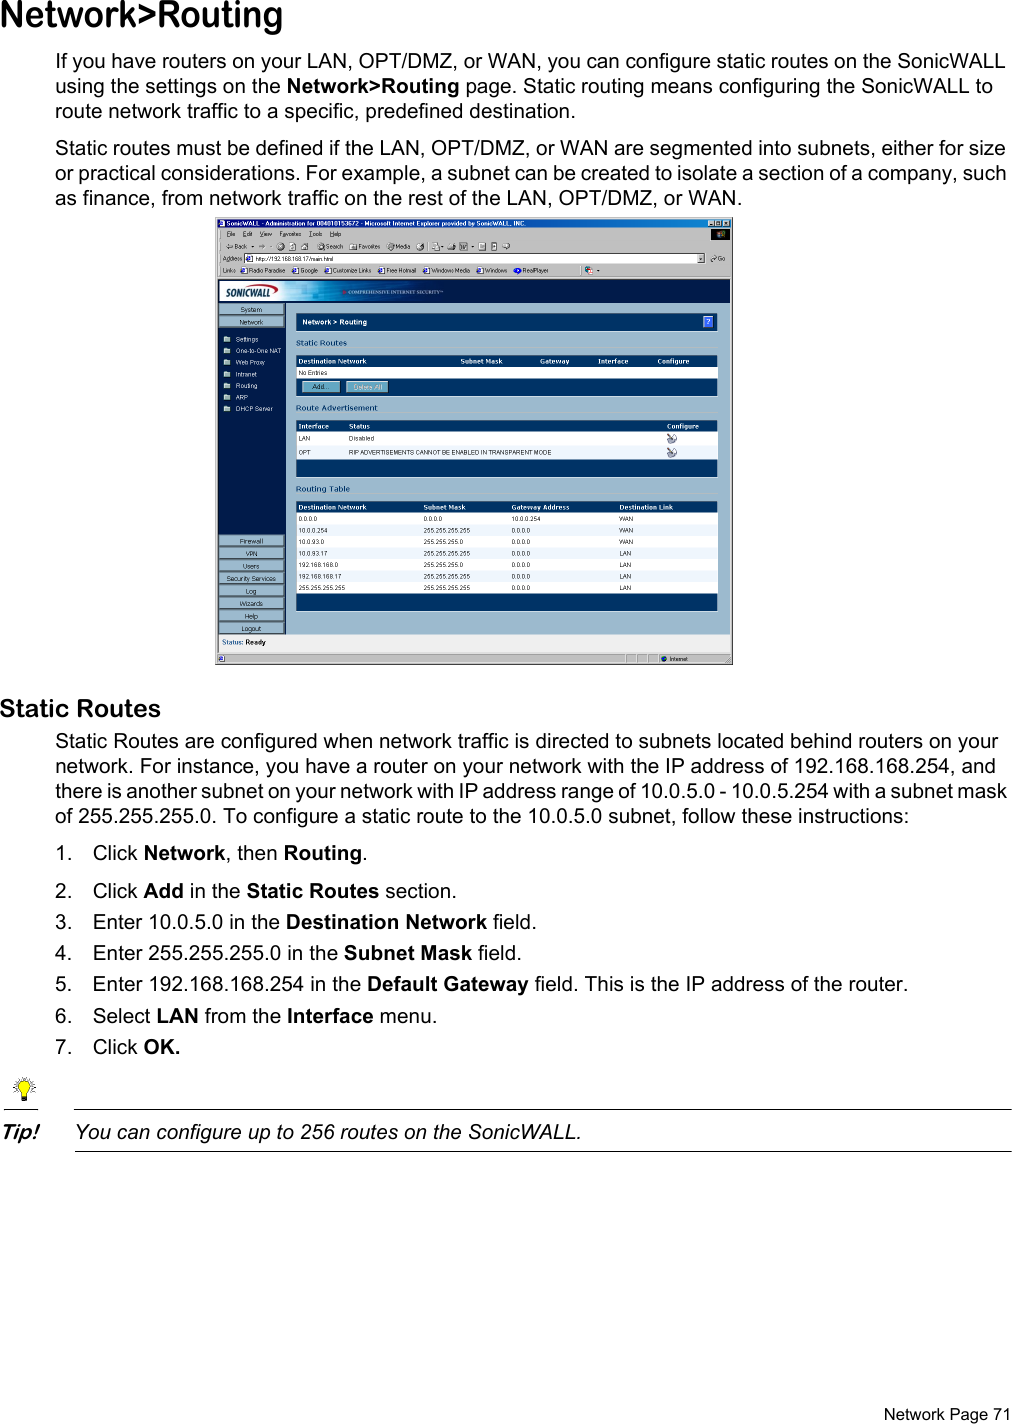  Network Page 71Network&gt;RoutingIf you have routers on your LAN, OPT/DMZ, or WAN, you can configure static routes on the SonicWALL using the settings on the Network&gt;Routing page. Static routing means configuring the SonicWALL to route network traffic to a specific, predefined destination. Static routes must be defined if the LAN, OPT/DMZ, or WAN are segmented into subnets, either for size or practical considerations. For example, a subnet can be created to isolate a section of a company, such as finance, from network traffic on the rest of the LAN, OPT/DMZ, or WAN. Static RoutesStatic Routes are configured when network traffic is directed to subnets located behind routers on your network. For instance, you have a router on your network with the IP address of 192.168.168.254, and there is another subnet on your network with IP address range of 10.0.5.0 - 10.0.5.254 with a subnet mask of 255.255.255.0. To configure a static route to the 10.0.5.0 subnet, follow these instructions:1. Click Network, then Routing. 2. Click Add in the Static Routes section. 3. Enter 10.0.5.0 in the Destination Network field. 4. Enter 255.255.255.0 in the Subnet Mask field. 5. Enter 192.168.168.254 in the Default Gateway field. This is the IP address of the router.6. Select LAN from the Interface menu. 7. Click OK.Tip!You can configure up to 256 routes on the SonicWALL.